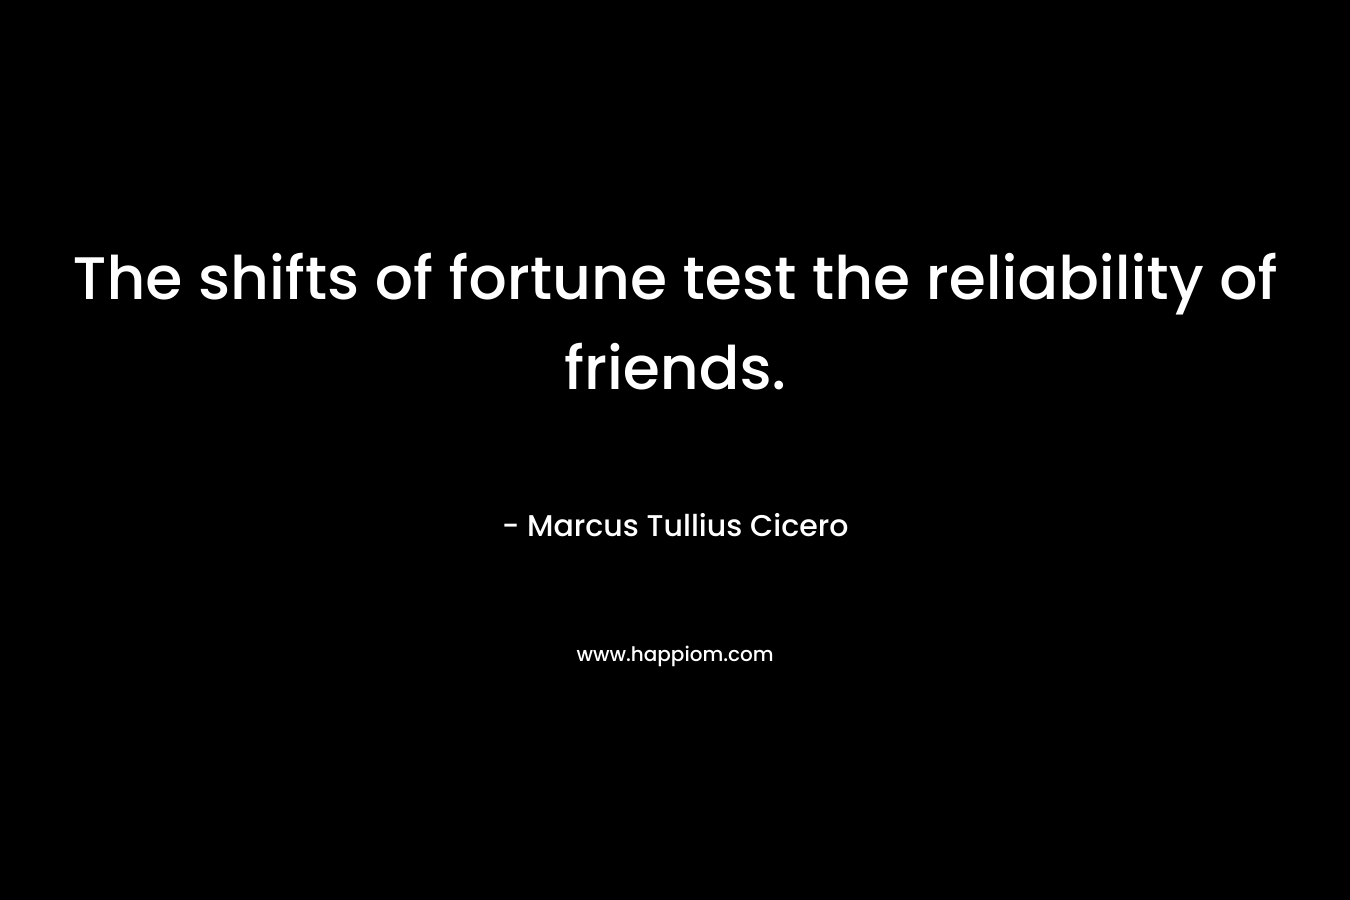 The shifts of fortune test the reliability of friends. – Marcus Tullius Cicero